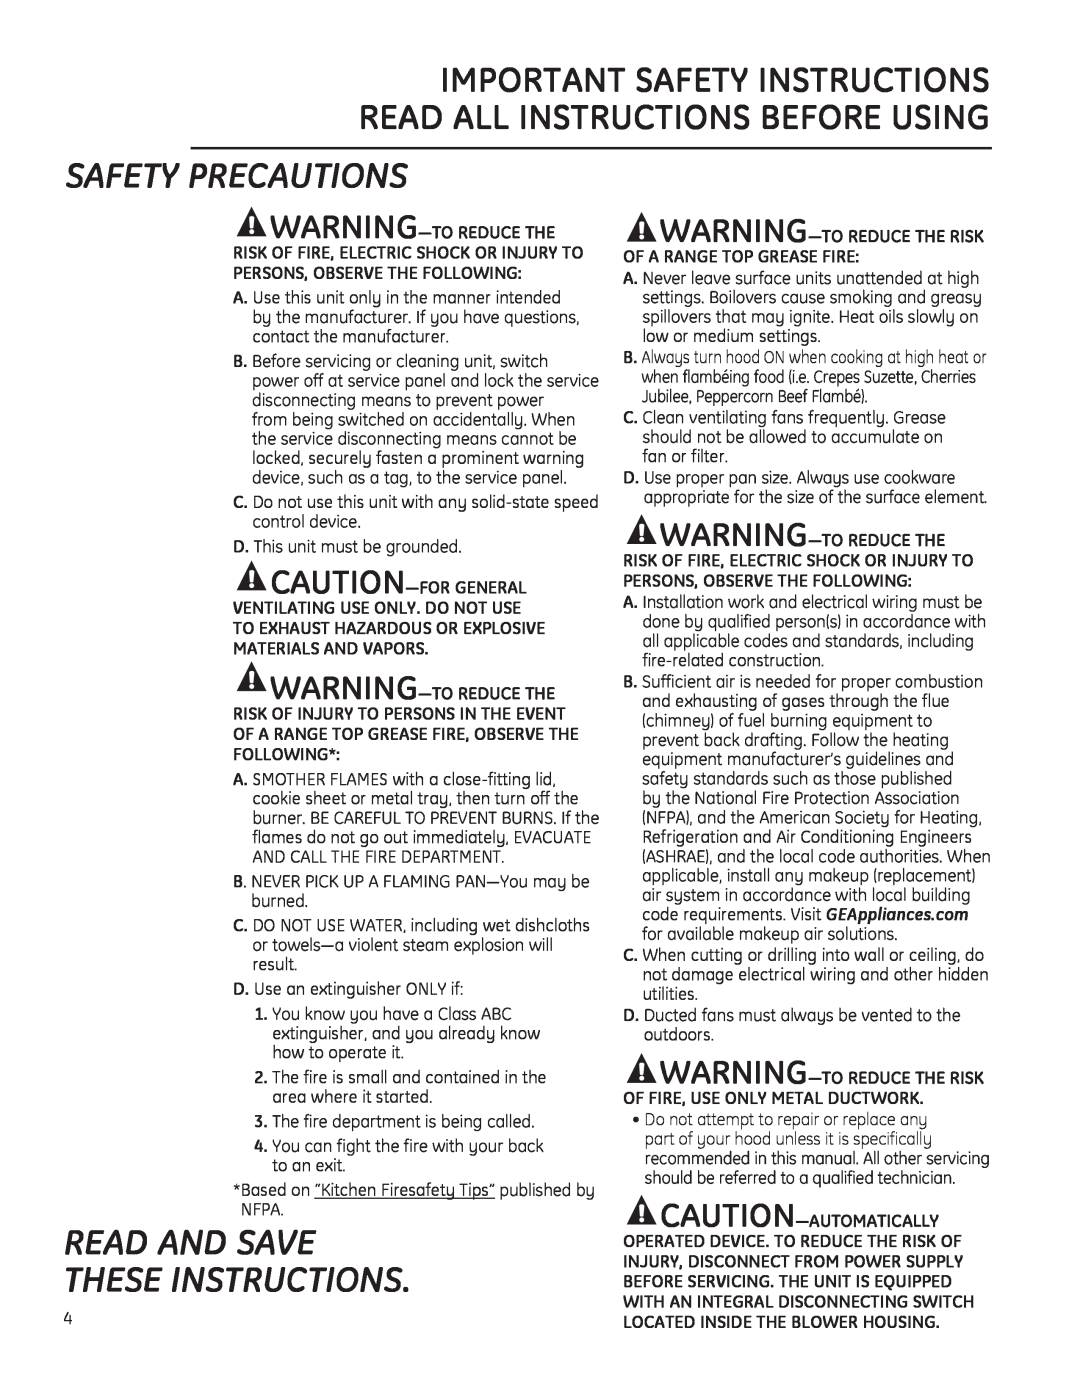 GE ZV830 Safety Precautions, Read And Save These Instructions, WARNING³7258&7+, Persons, Observe The Following 